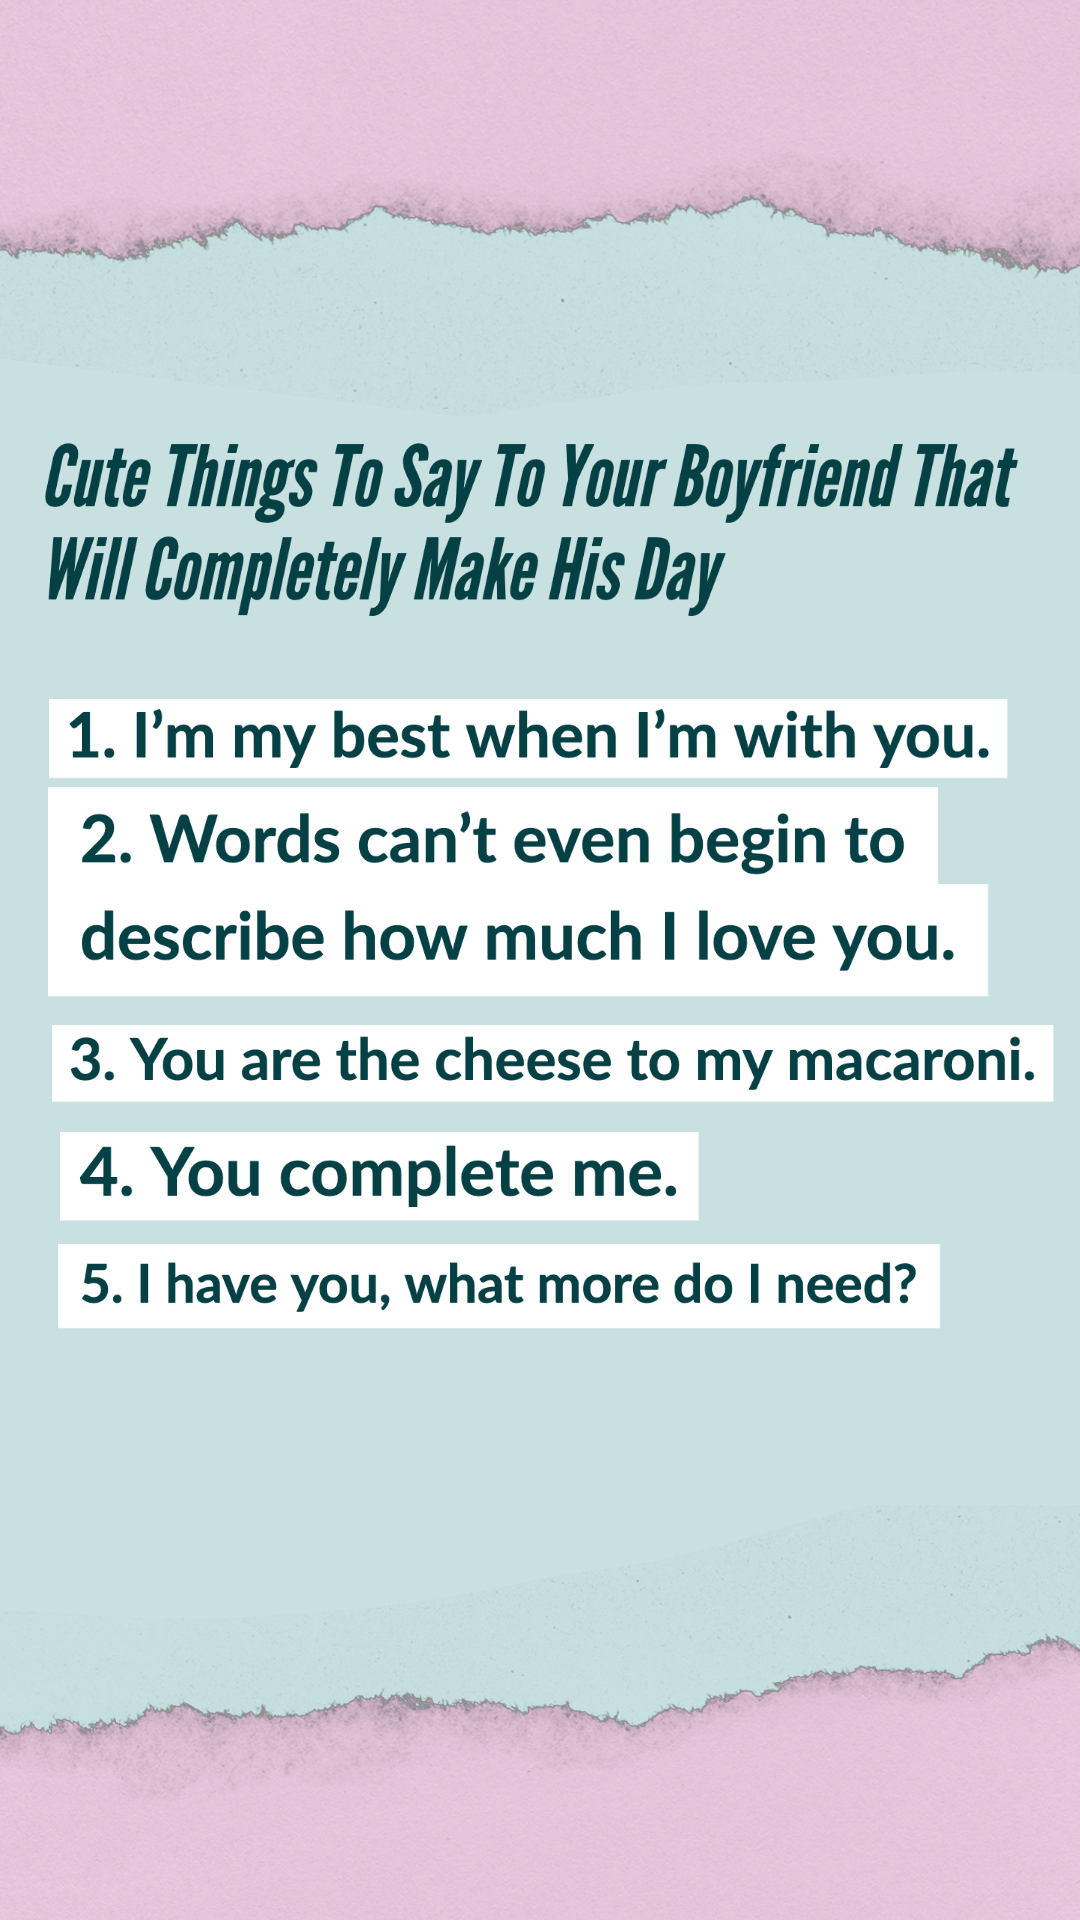 20+ Cute Things To Say To Your Boyfriend That Will Make Him Feel ...